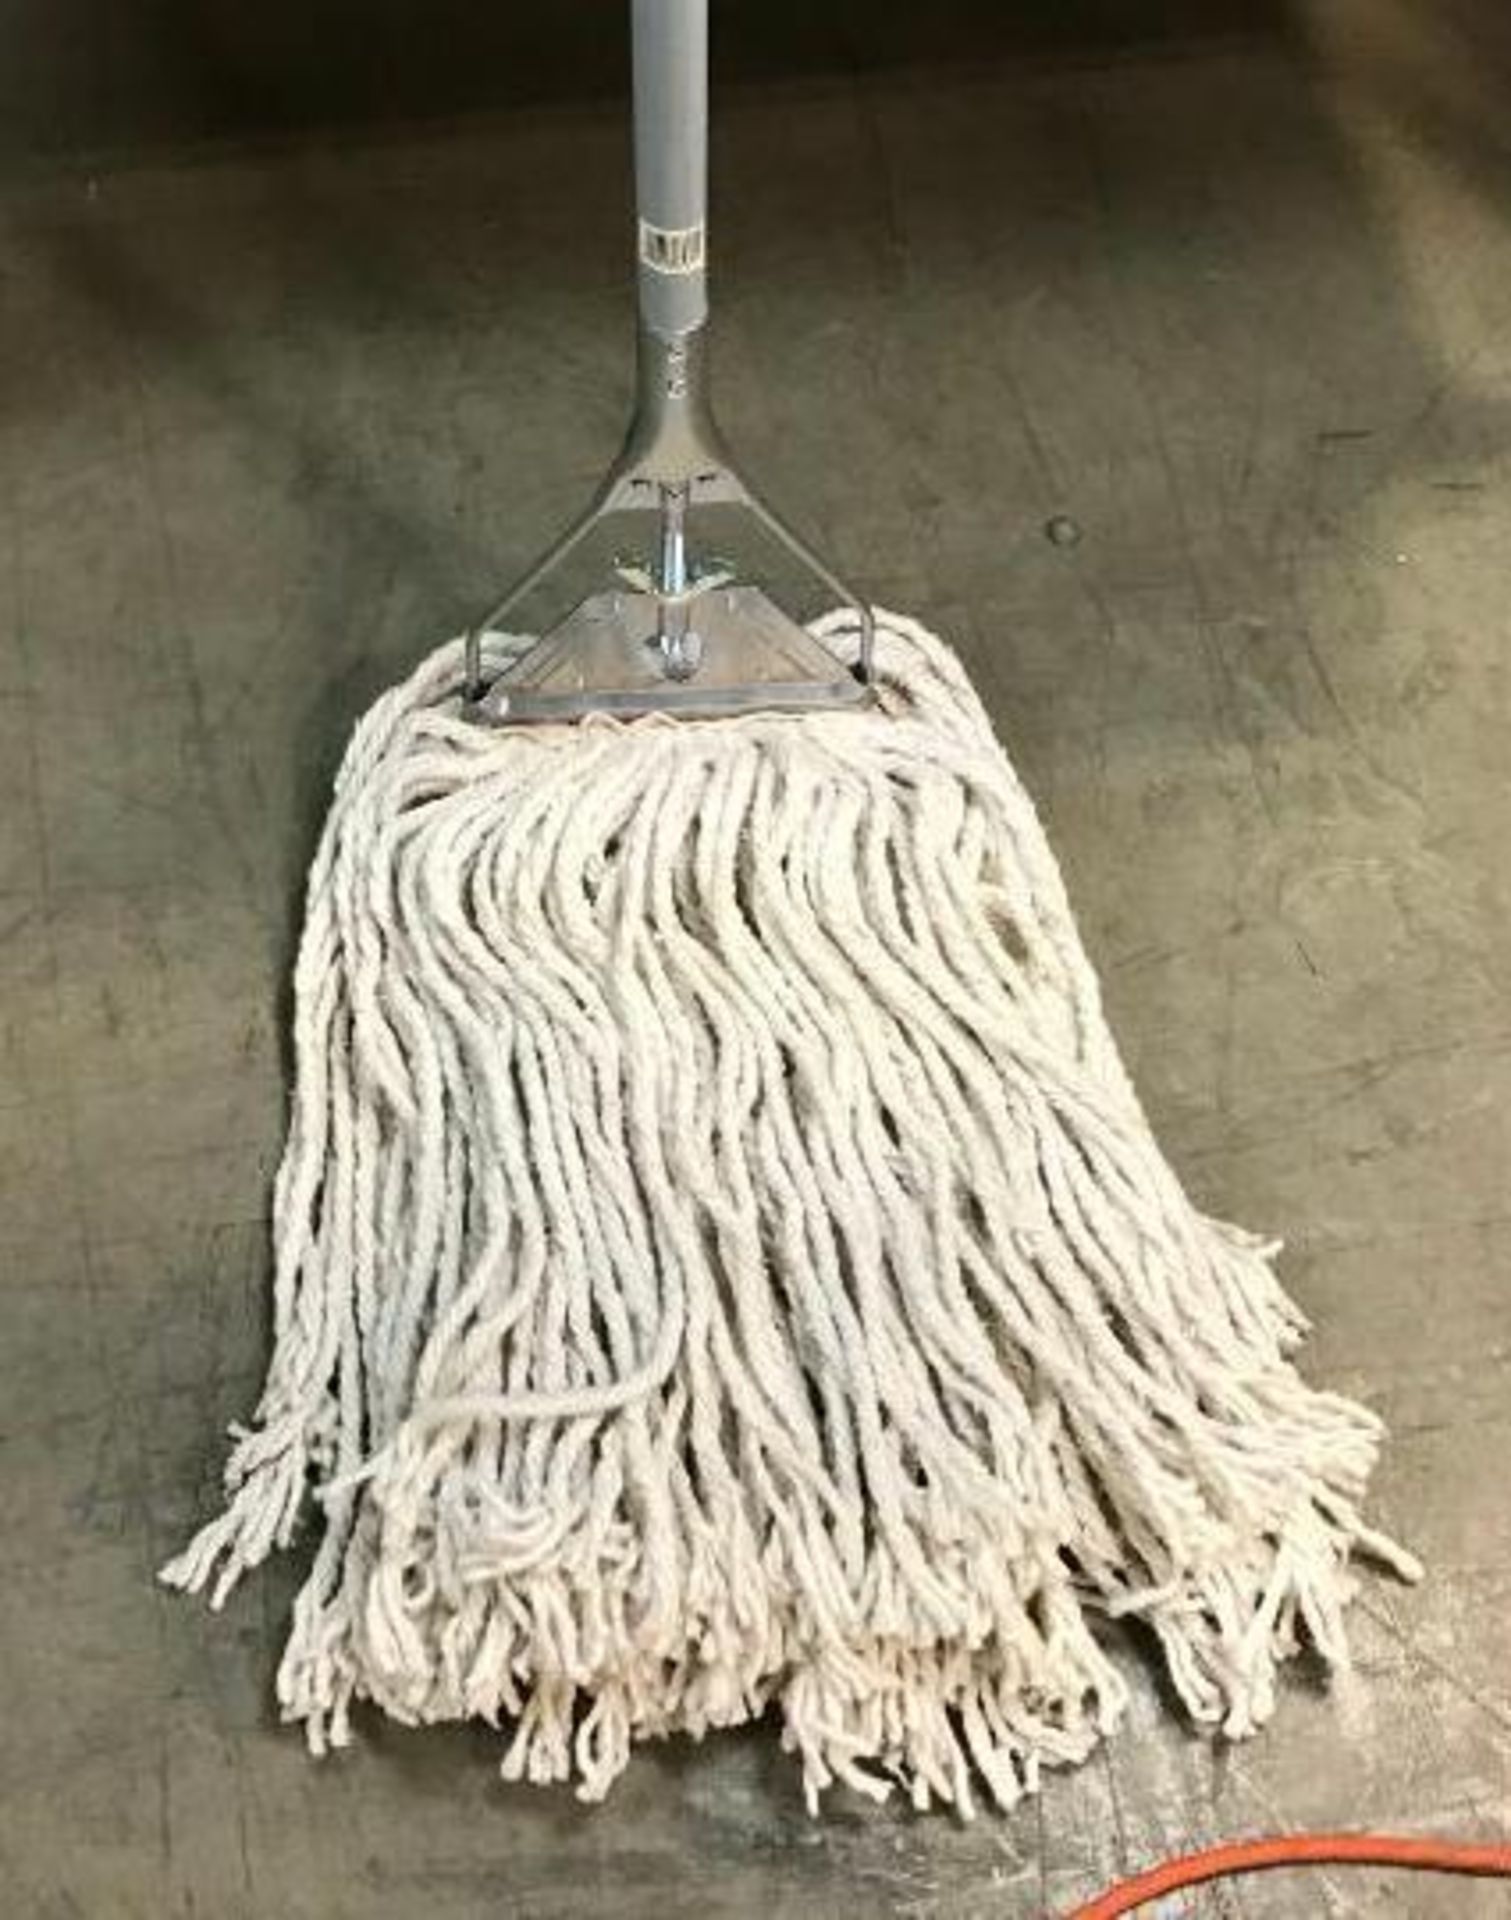 60" METAL HANDLE MOP WITH QUICK RELEASE HEAD - Image 3 of 3